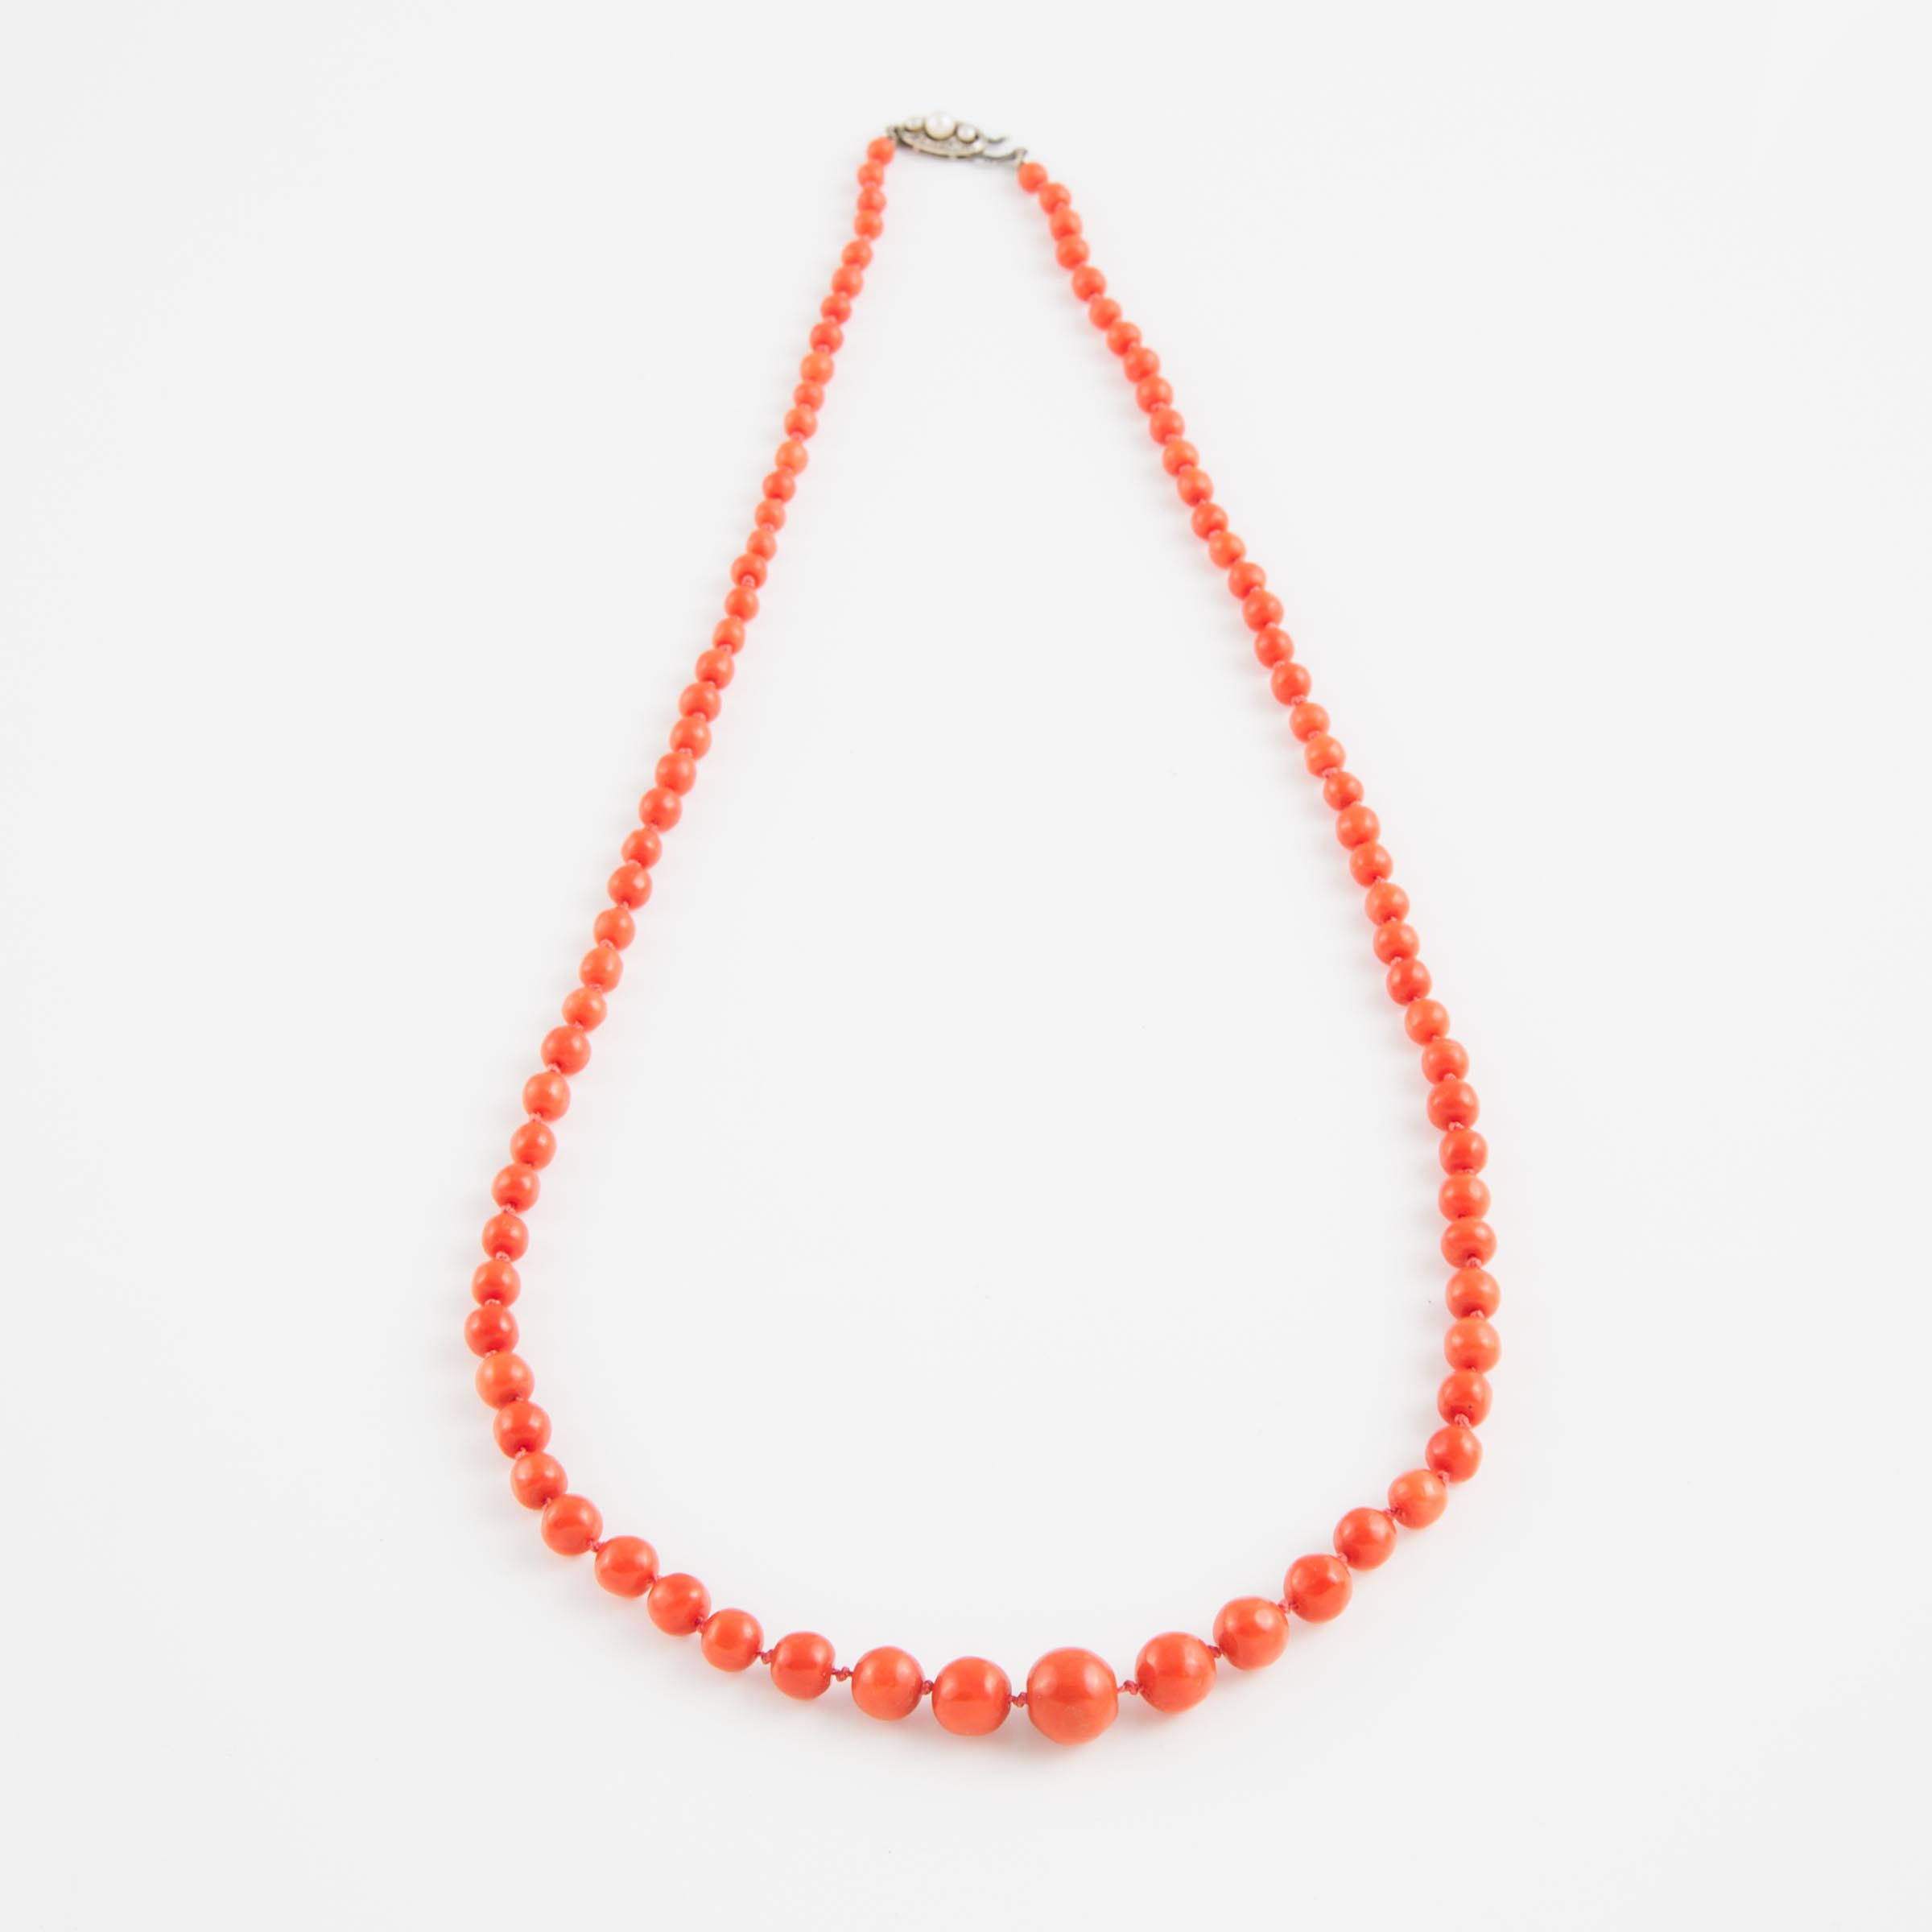 Graduated Coral Bead Necklace